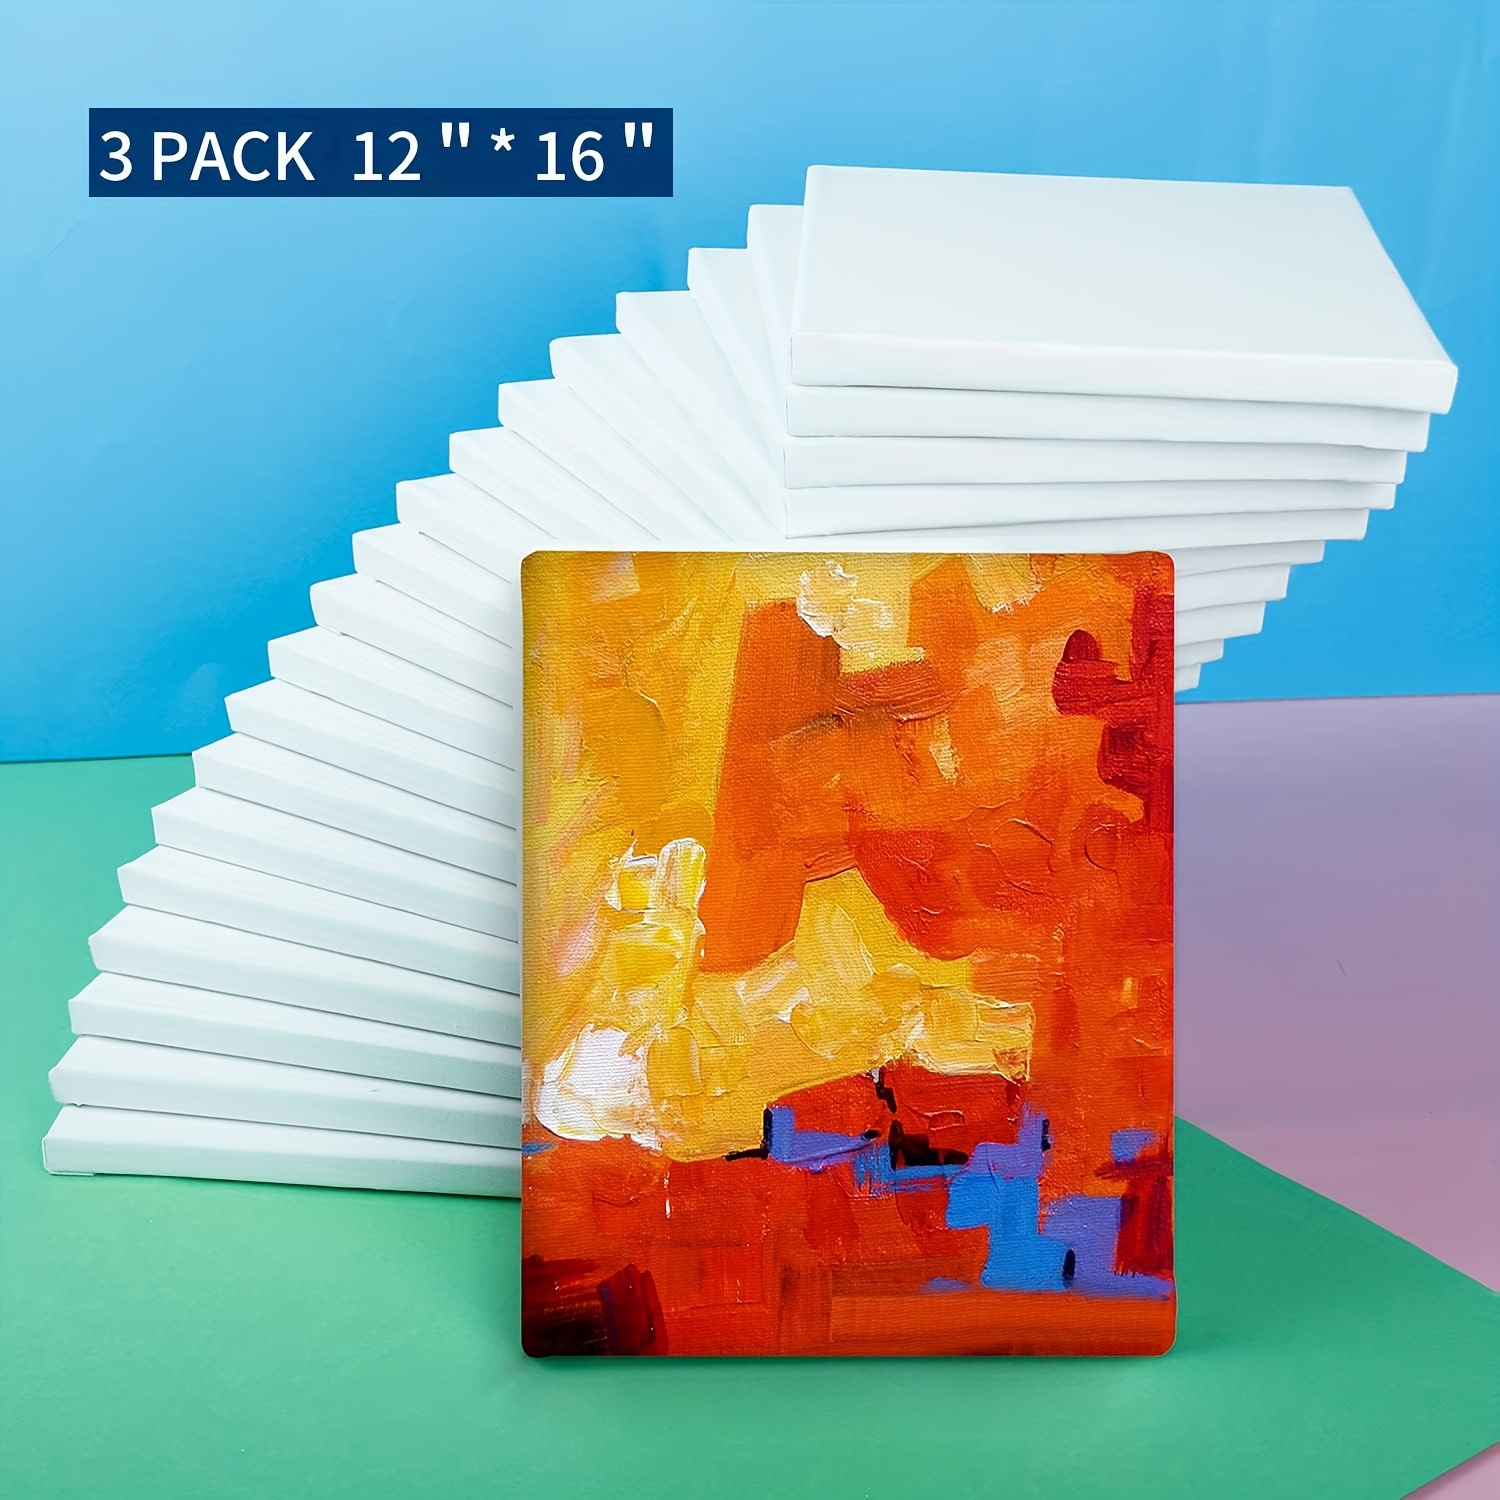  24 Packs Canvases for Painting with 4 Mini Easel, Canvas Panels  for Oil Watercolor Canvas Painting Kit 8x10 5x7 Hexagon Round Rectangle  Small White Blank Canvas Boards Bulk for Kids Adult